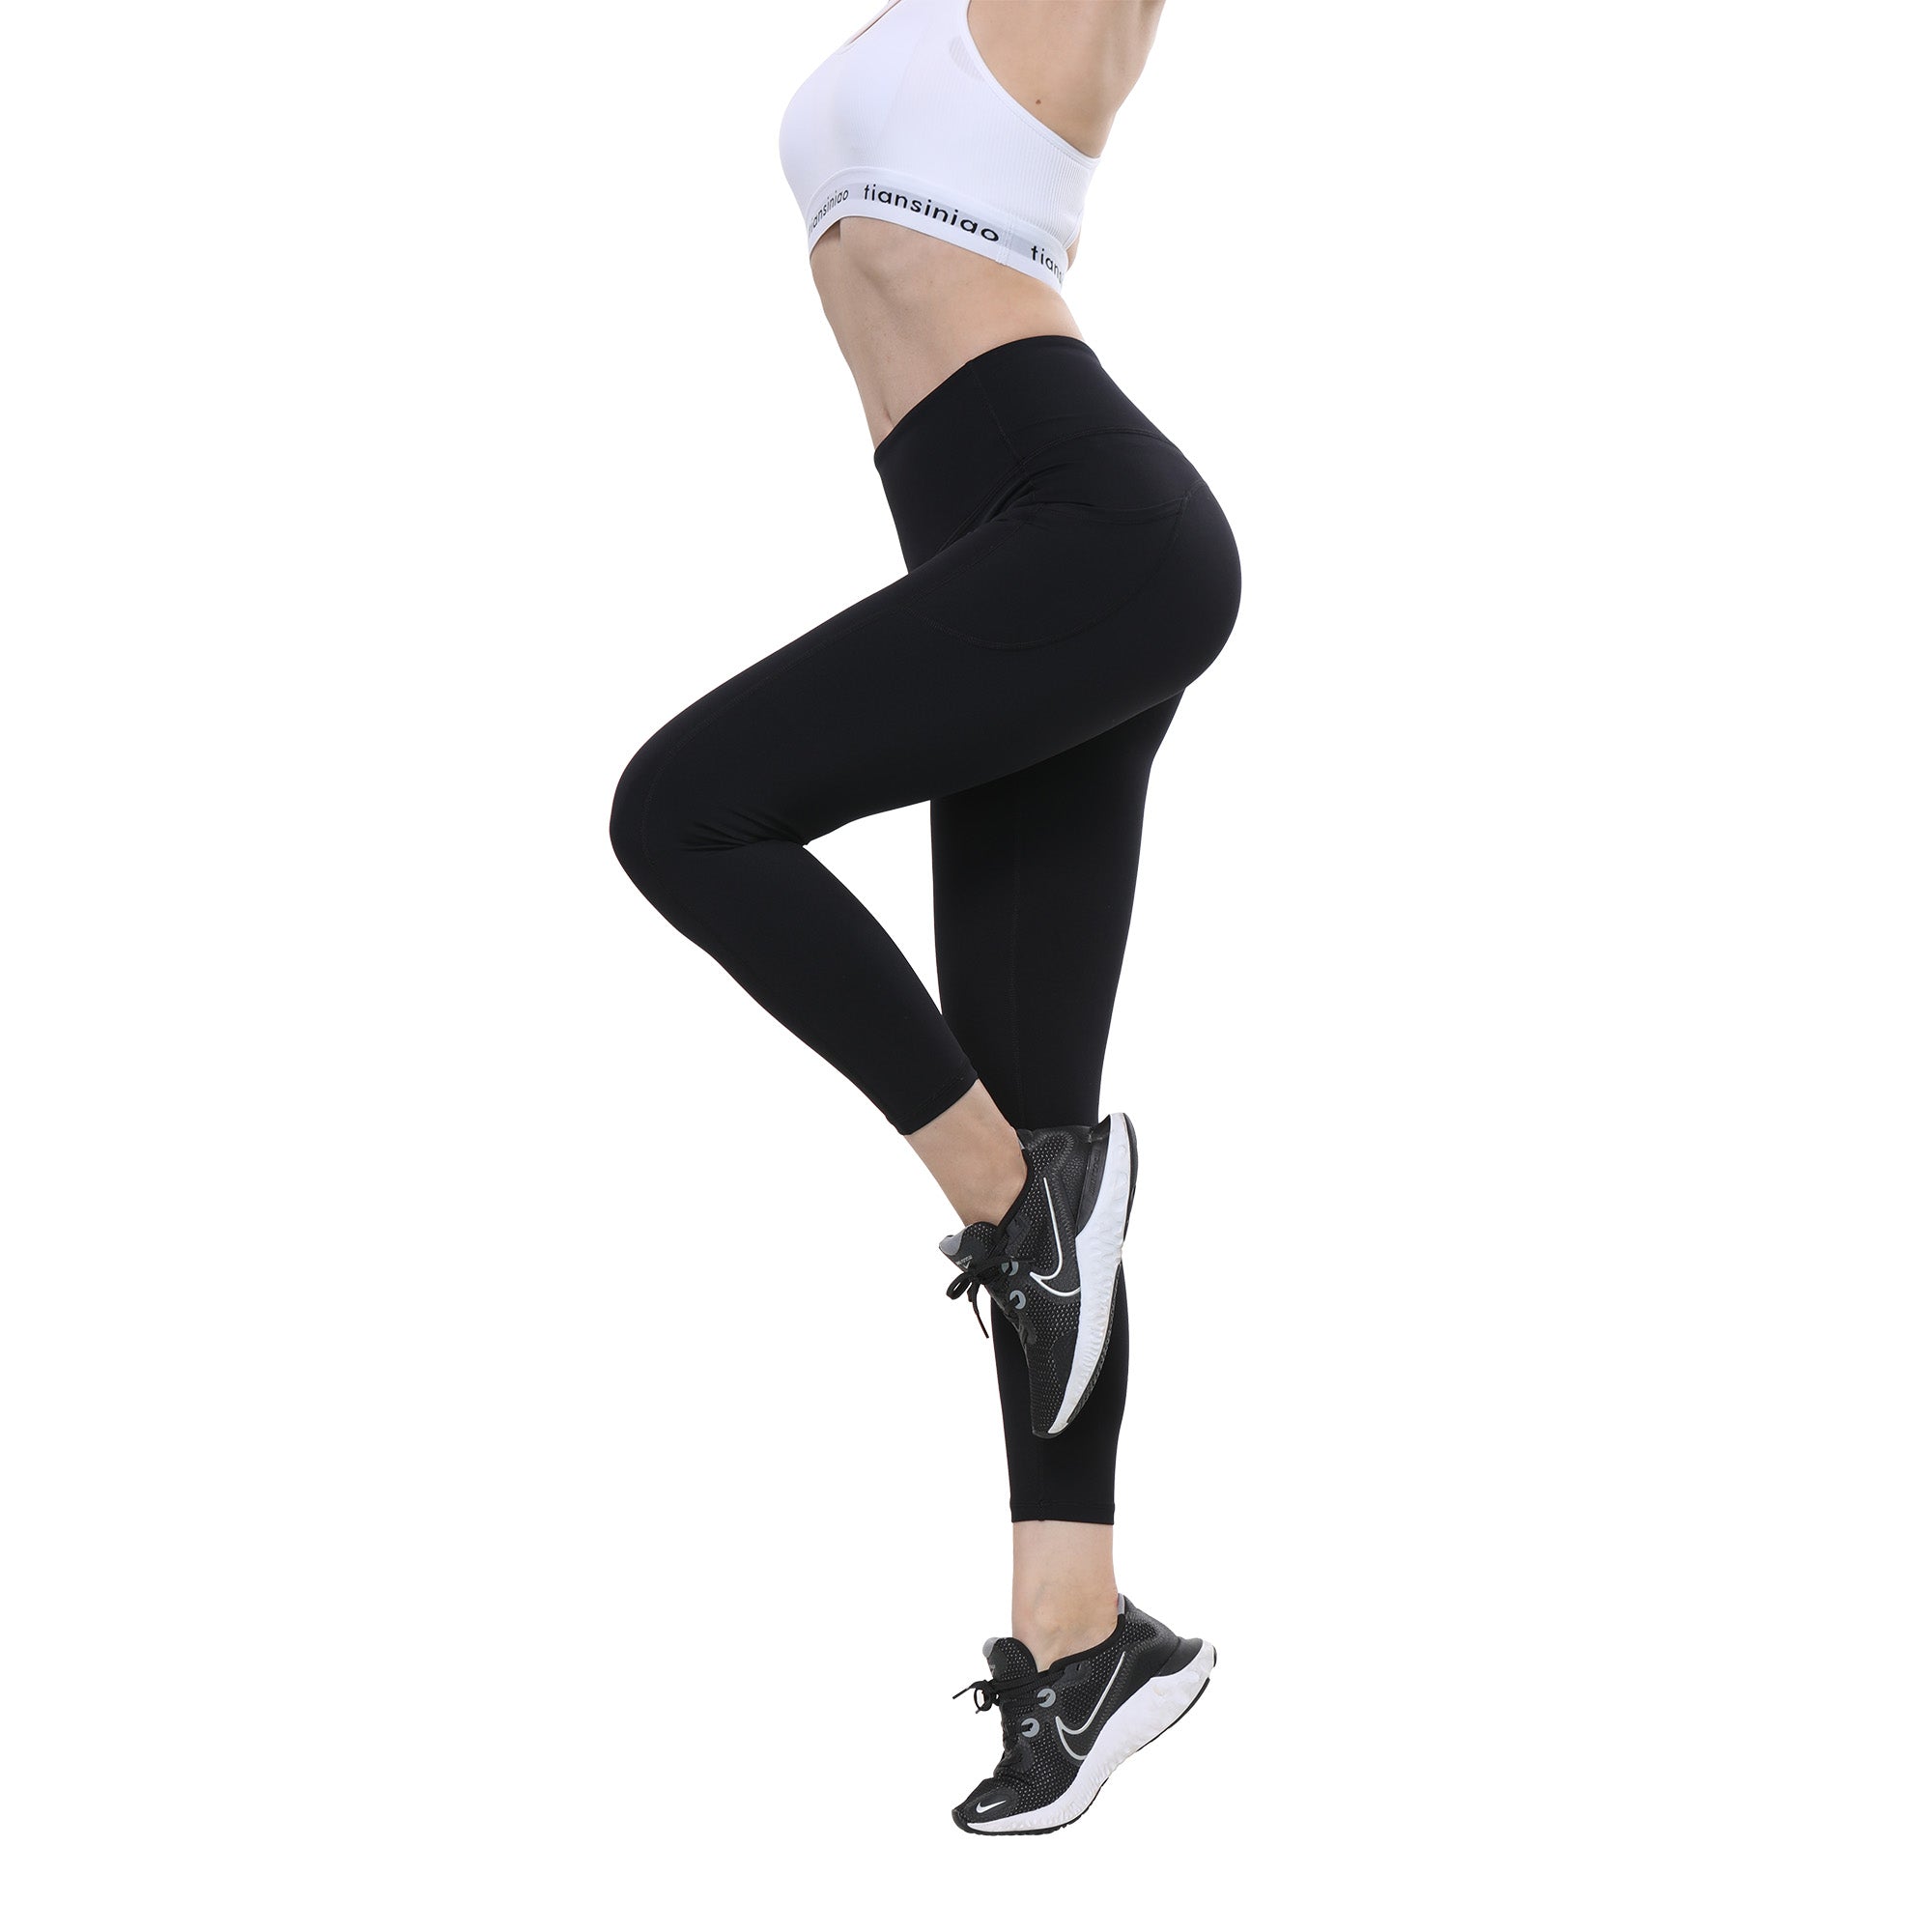 High Waist Camo Yoga Pants For Women And Girls Athletic Running Align  Leggings For Workout, Sports Outfits In Sizes S XL From Taobushop, $24.35